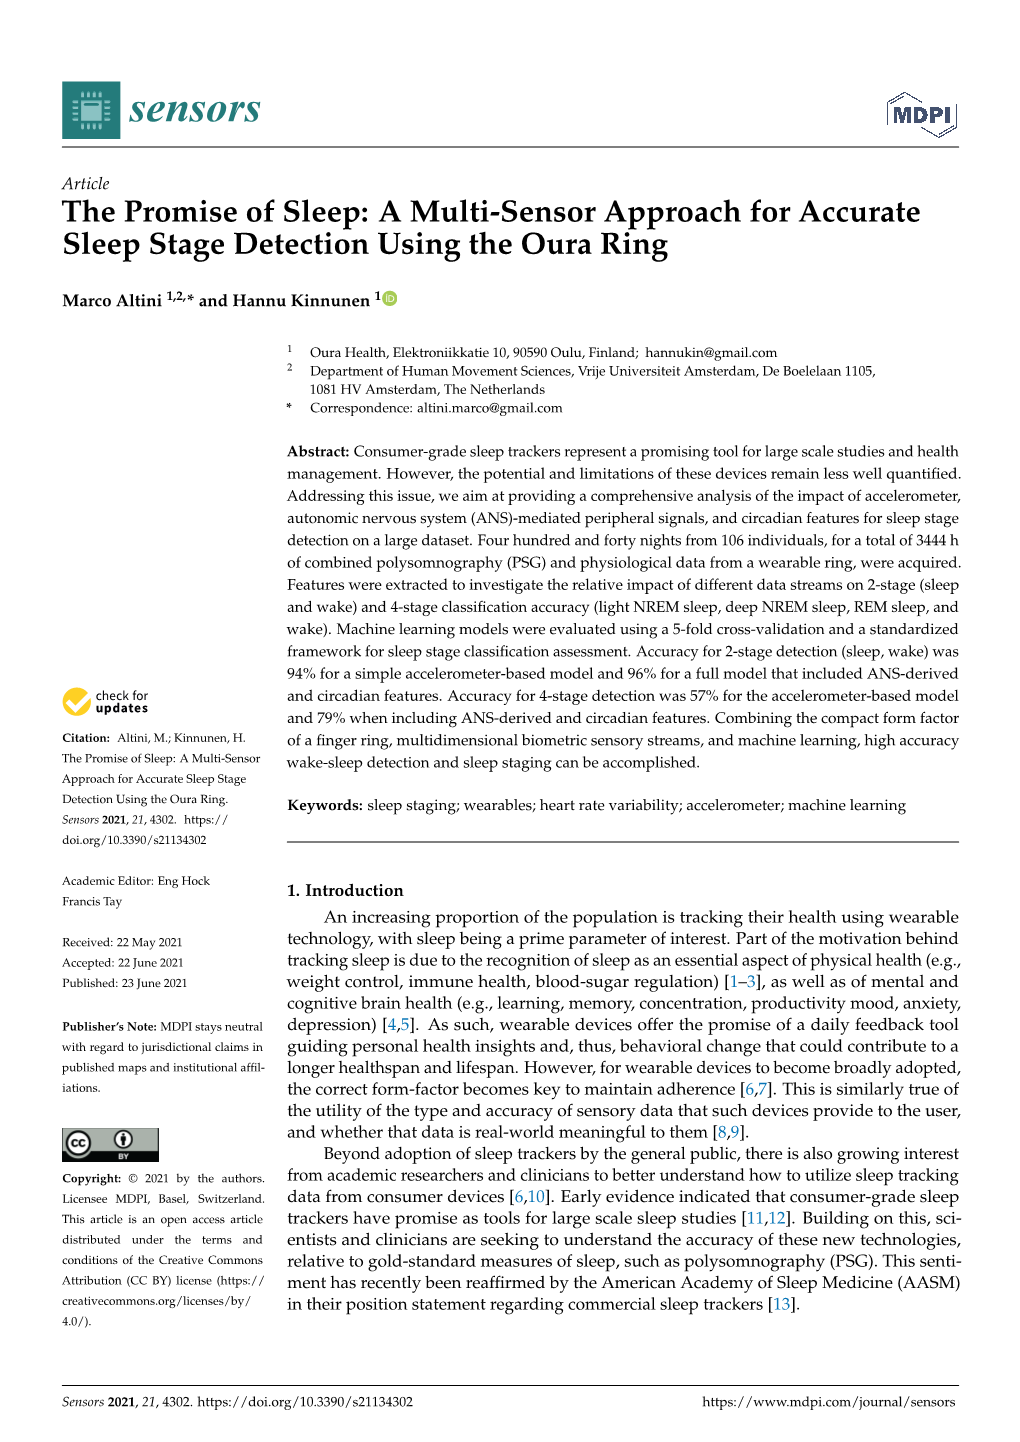 A Multi-Sensor Approach for Accurate Sleep Stage Detection Using the Oura Ring